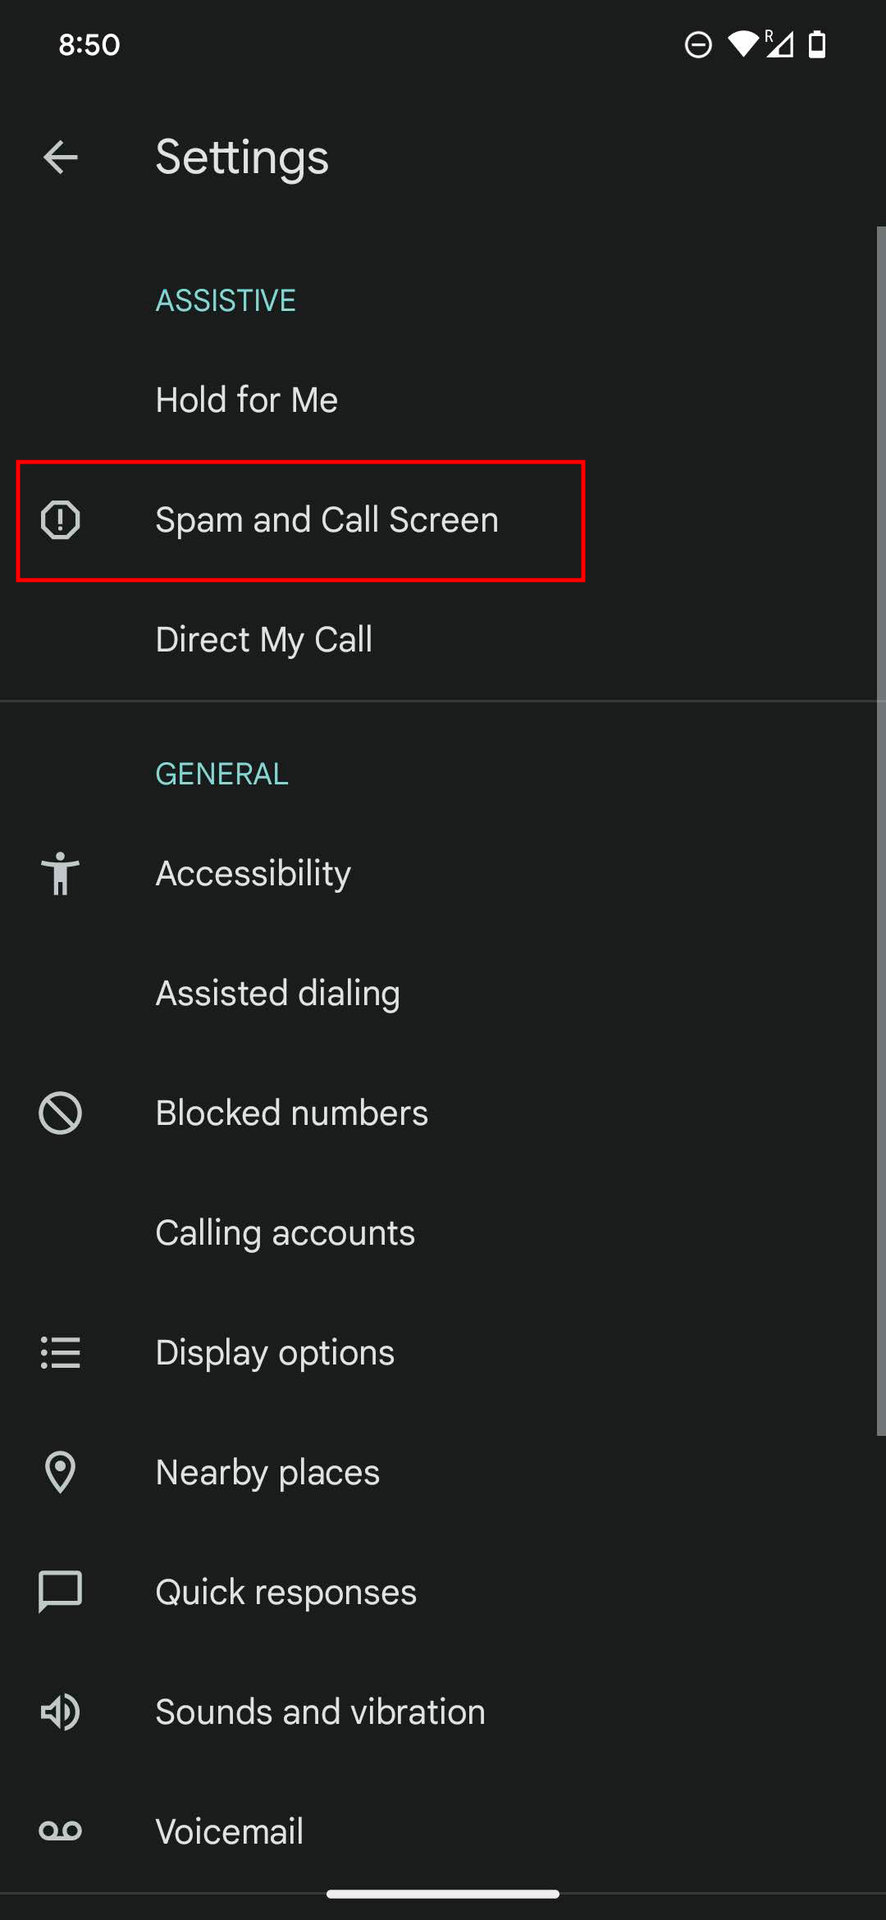 How to change the assistant voice for screened calls 3